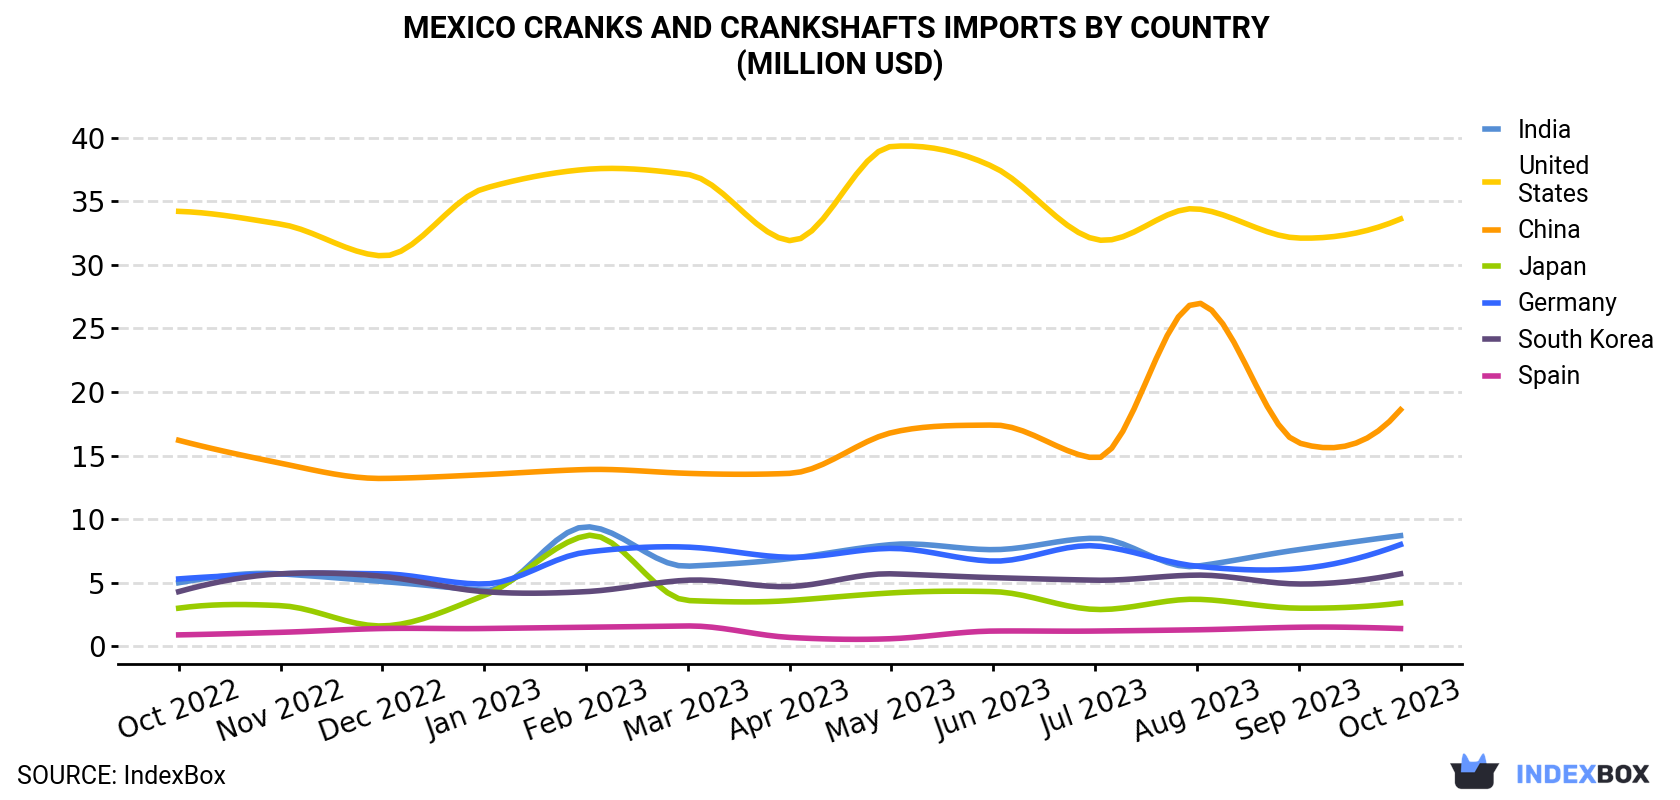 Mexico Cranks And Crankshafts Imports By Country (Million USD)